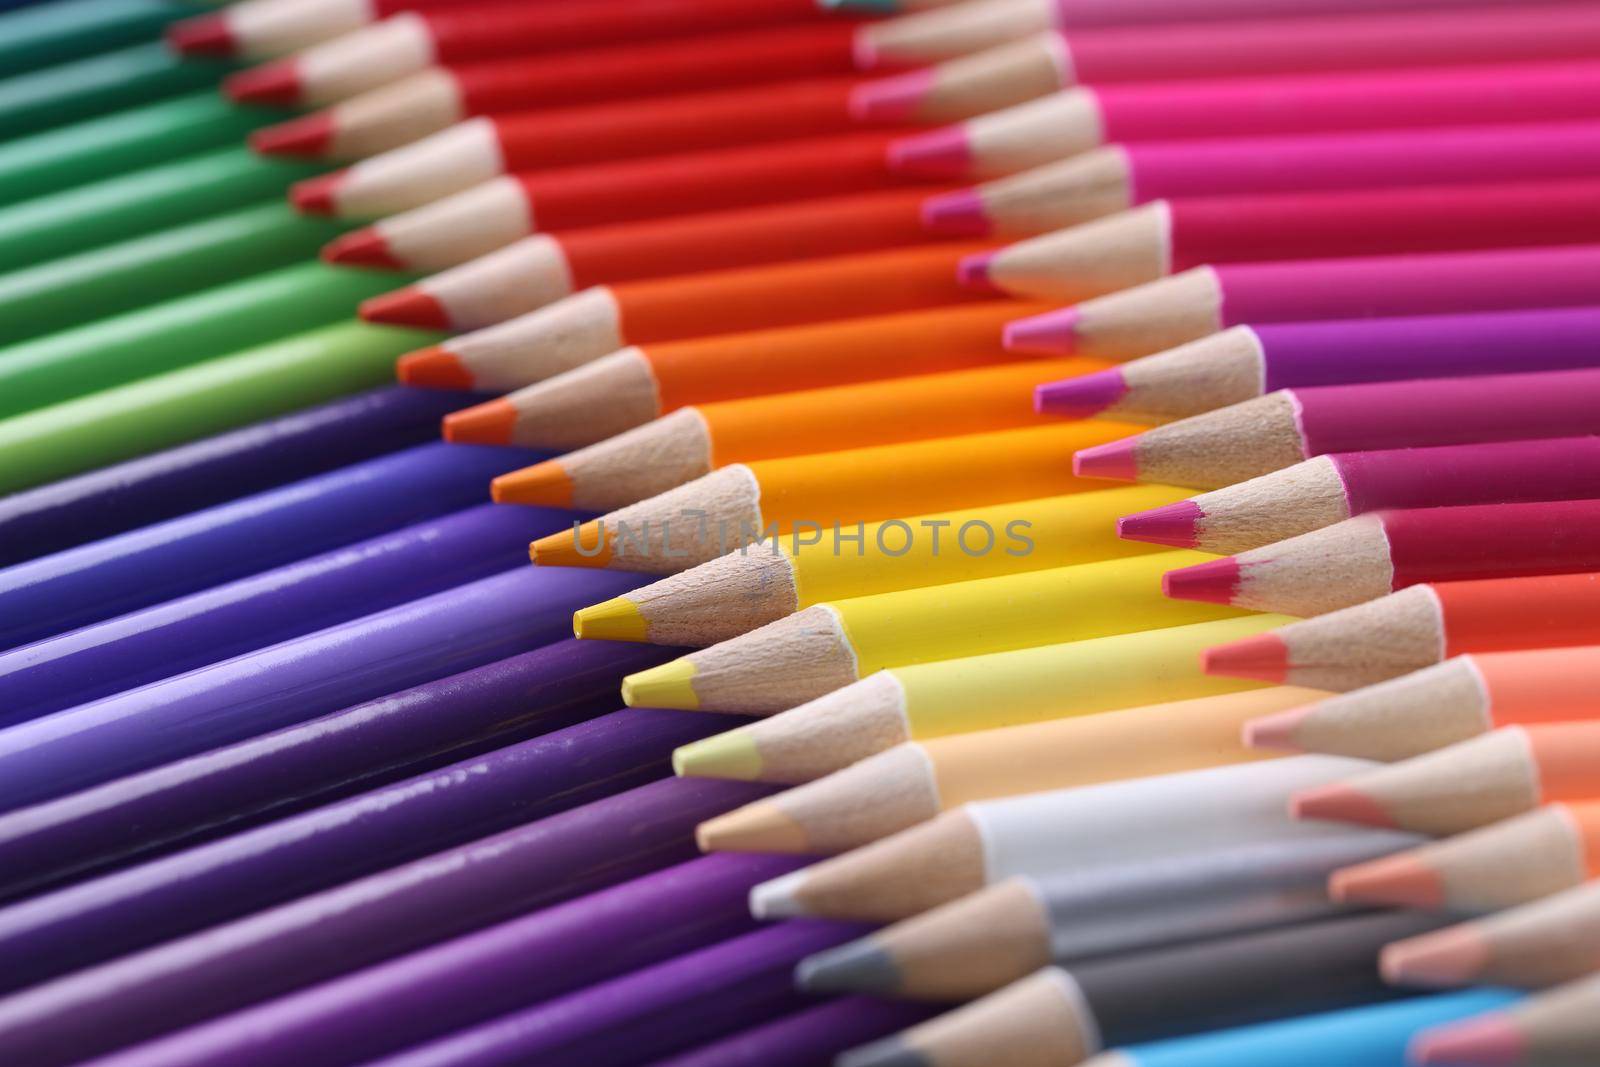 Colored pencils closeup. Collection of colored pencils in row concept